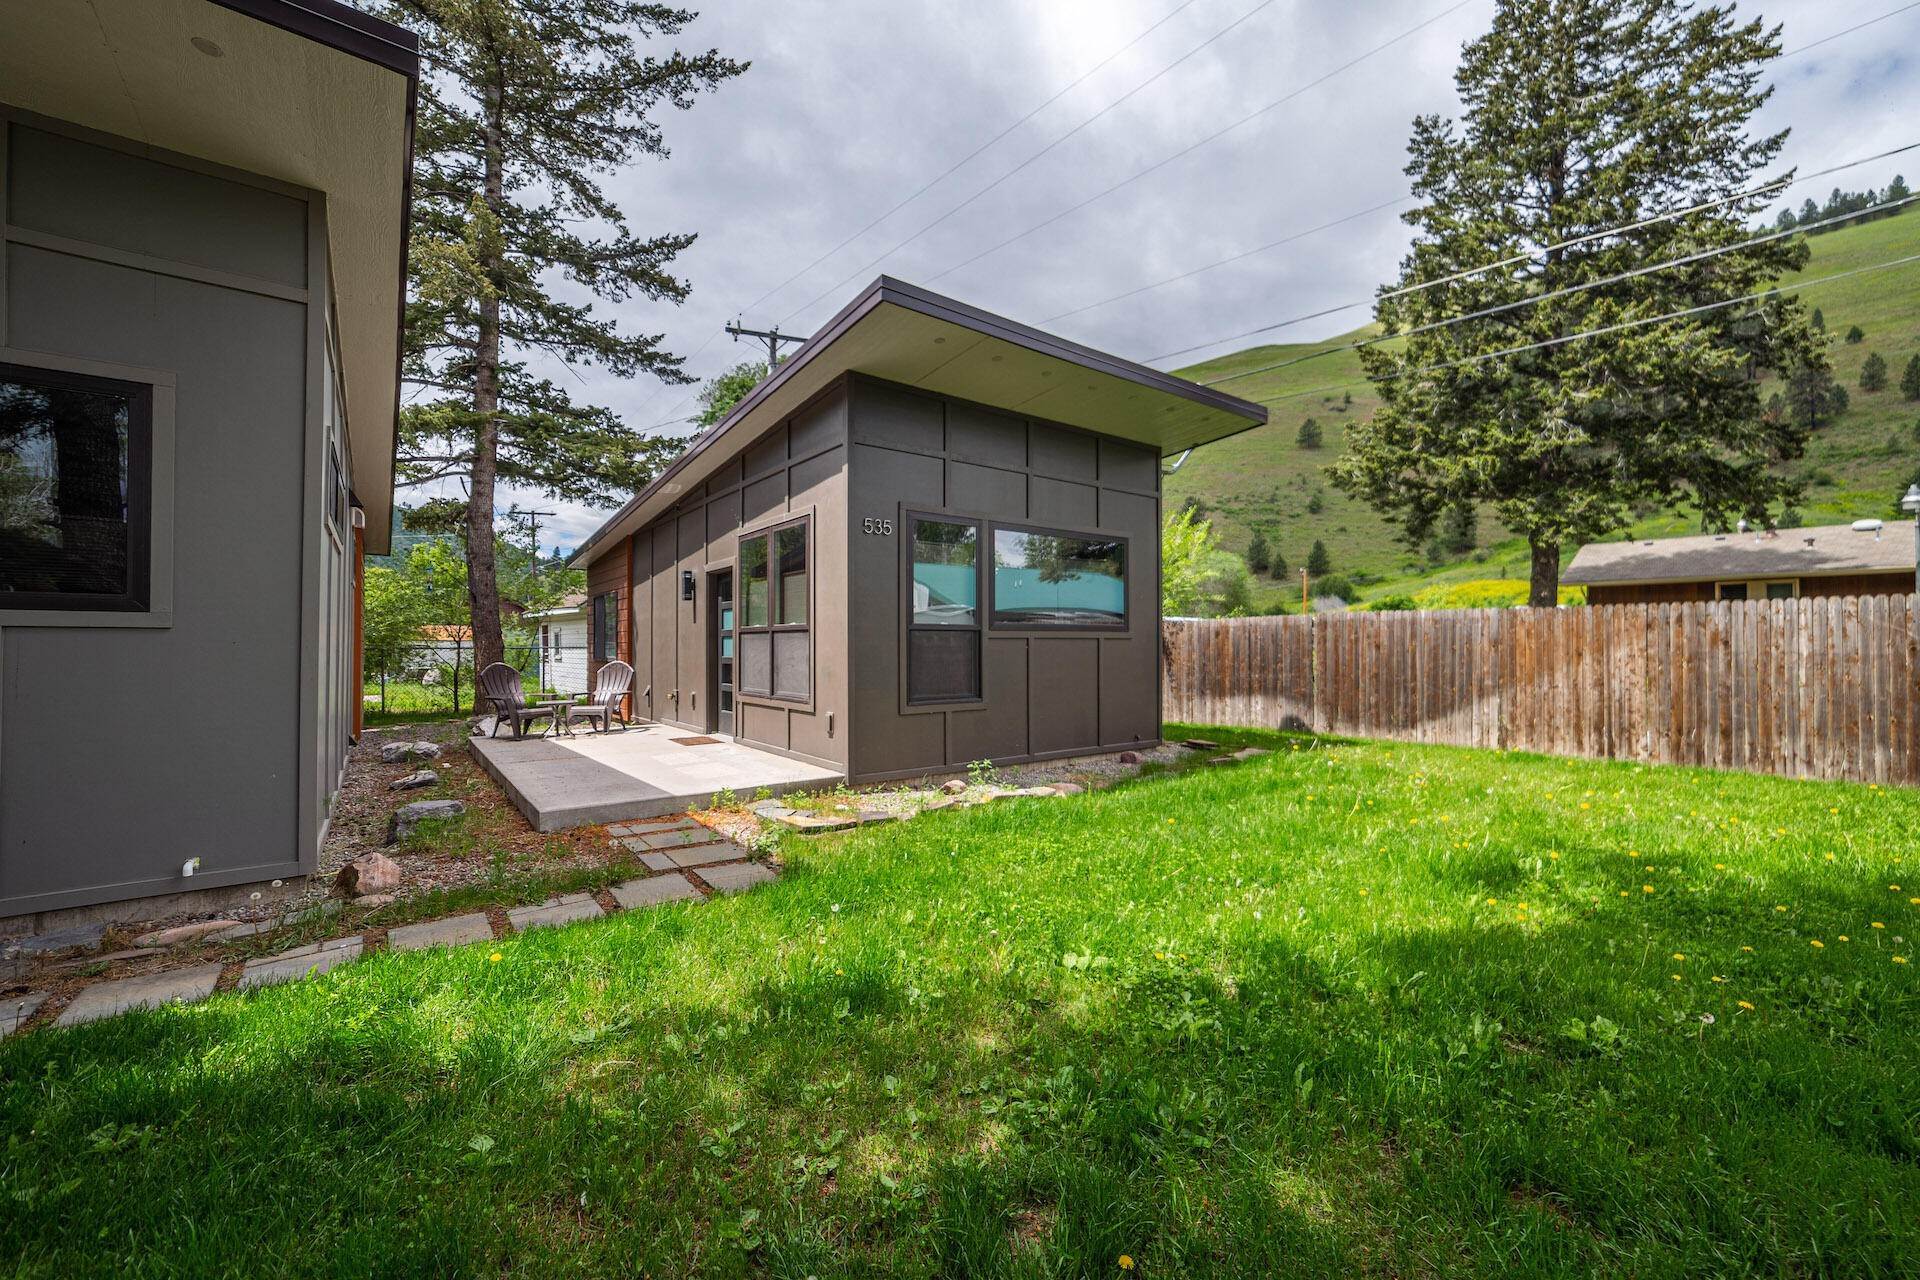 Multi-Family Homes for Sale at 505/510 Tiny House Court, Missoula, Montana 59802 United States